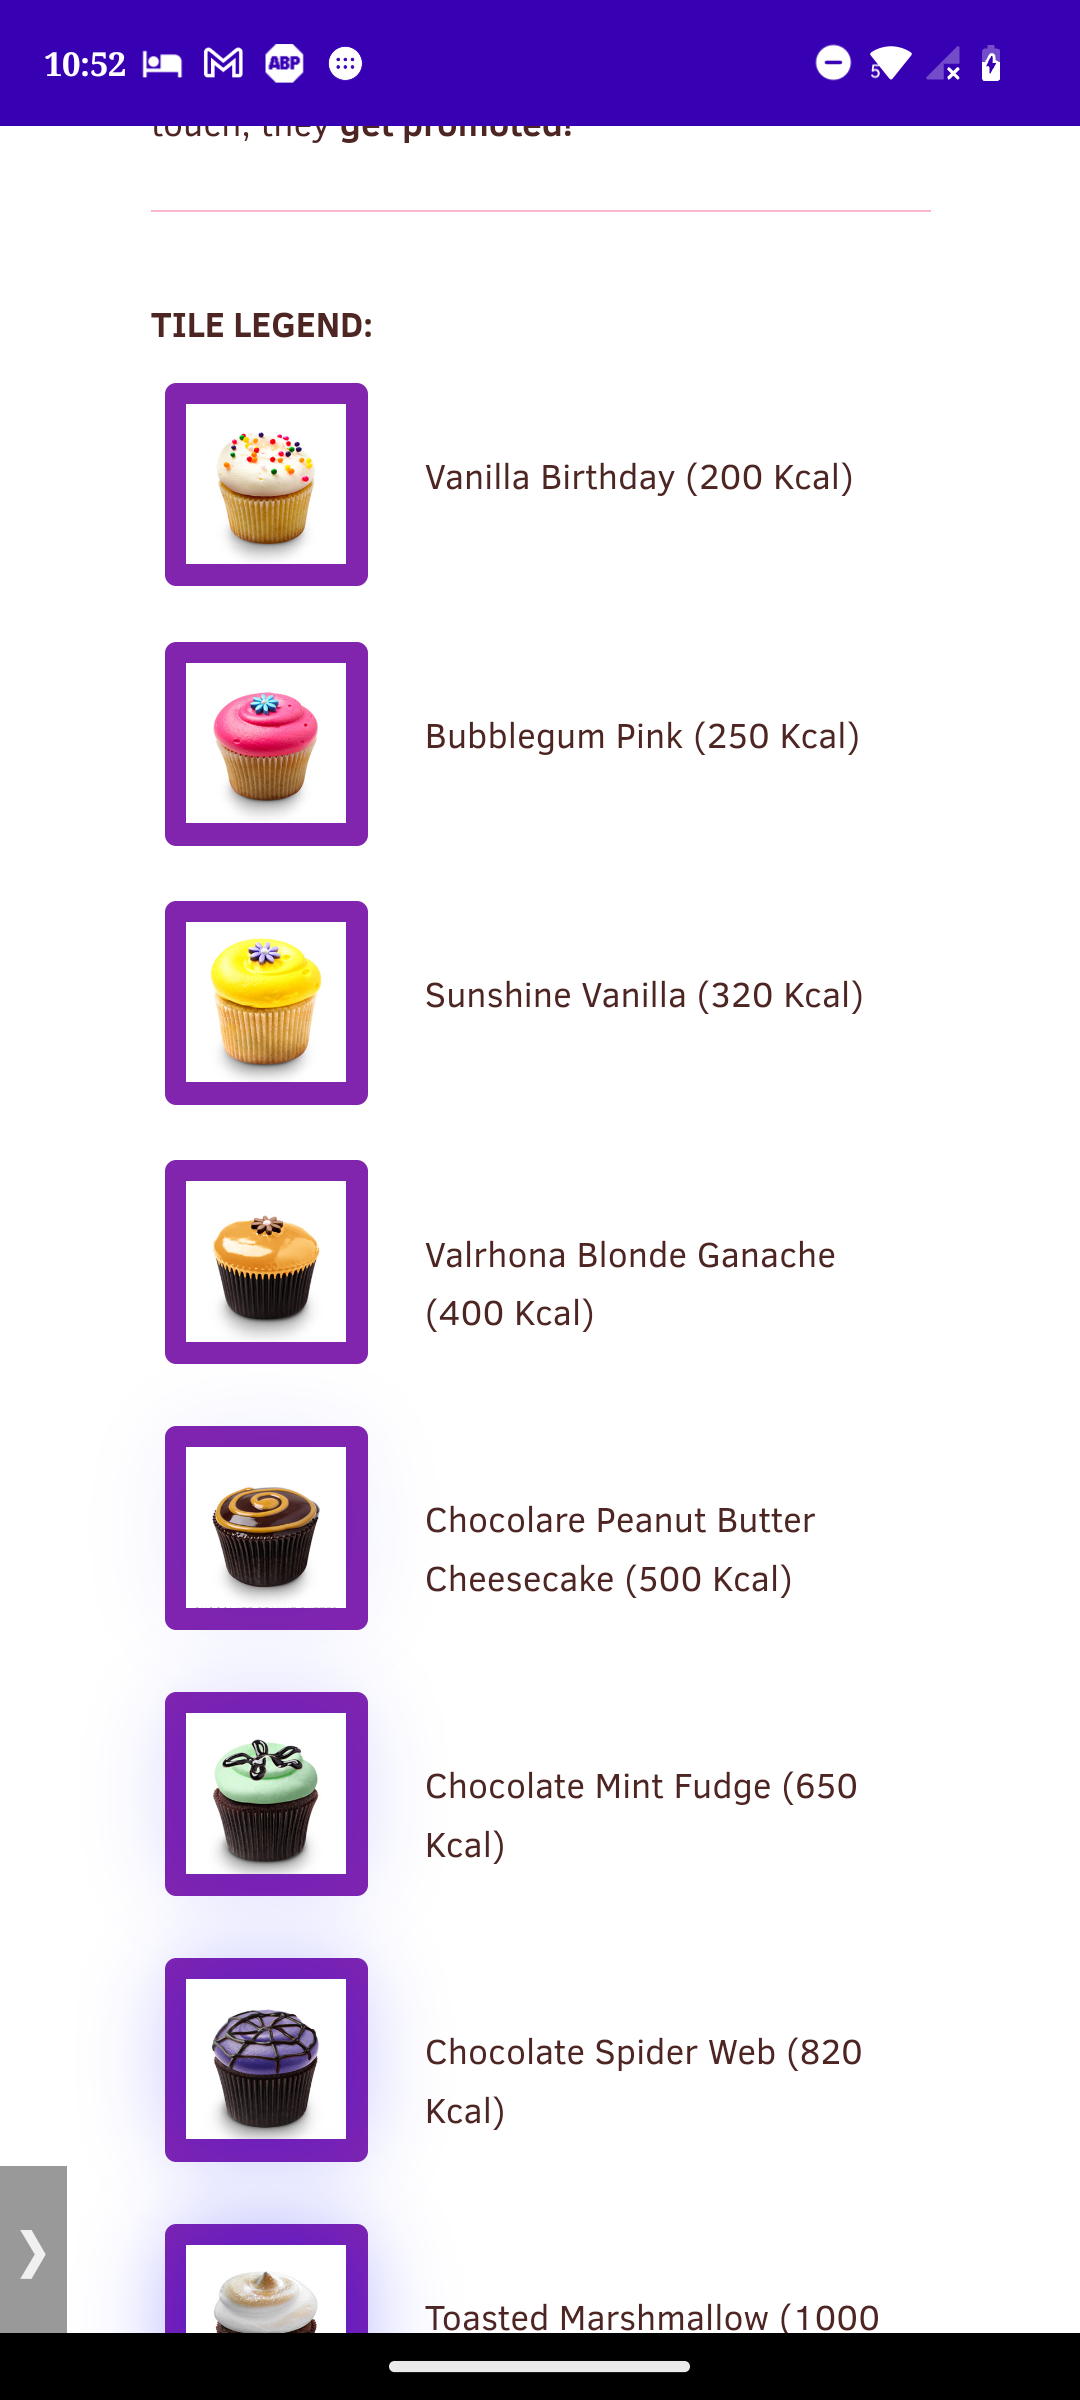 About: 2048 Cupcake (iOS App Store version)